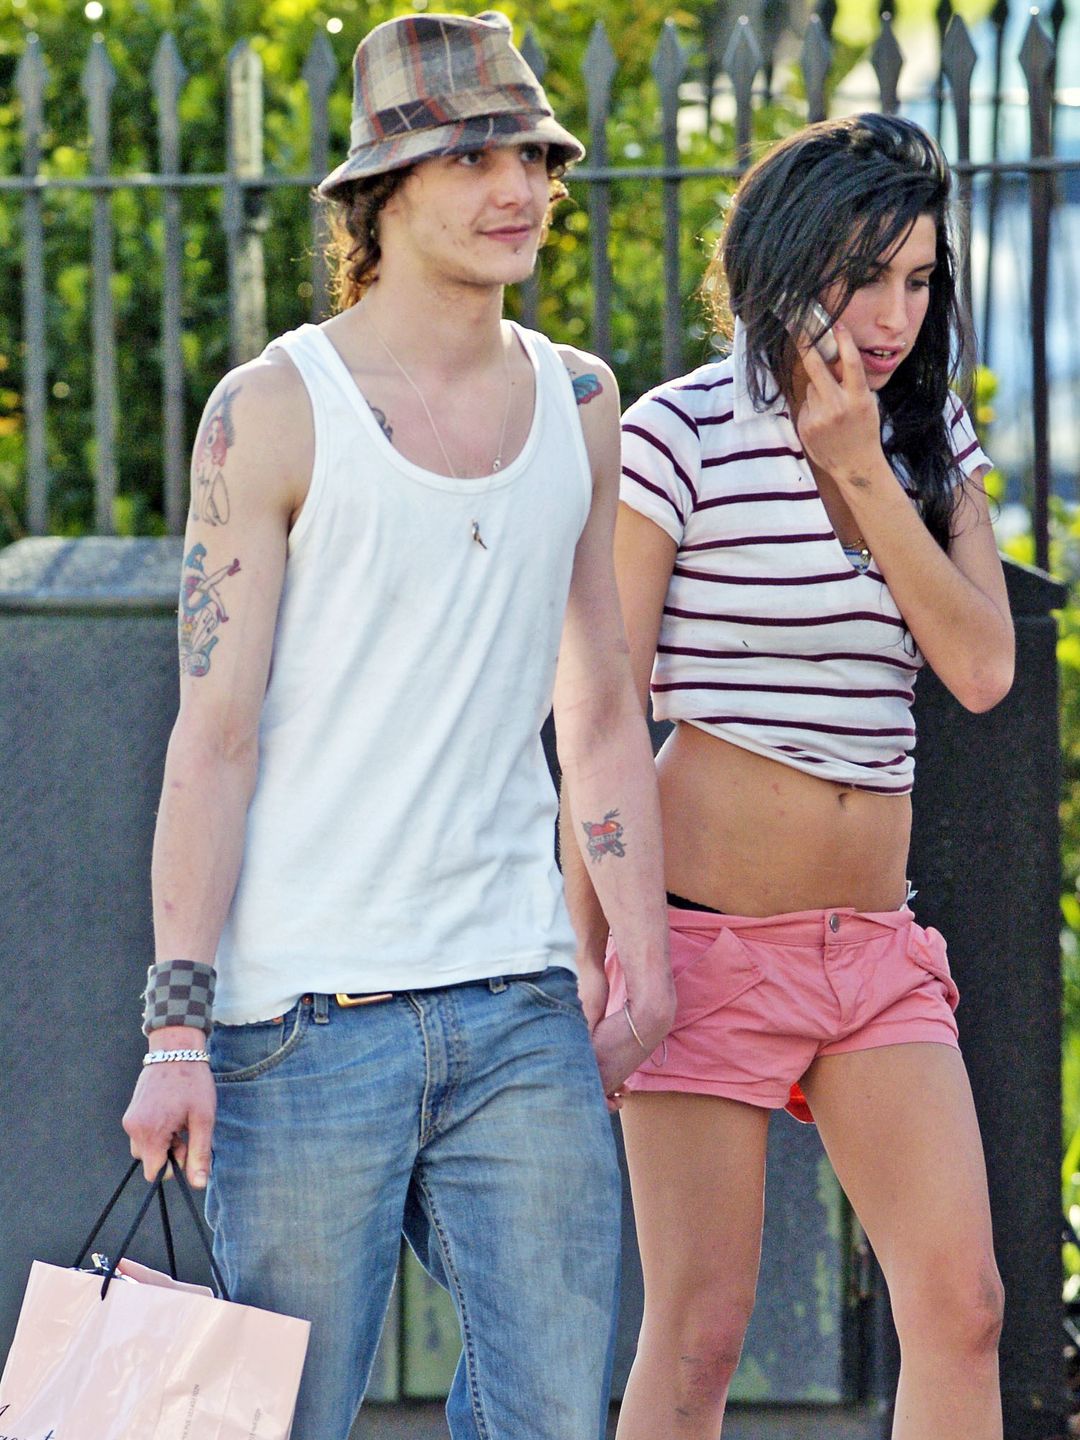 Amy Winehouse and her boyfriend at the time Blake Fielder-Civil walking in the park. Amy wears a striped t-shirt and hot pink mini shirts 